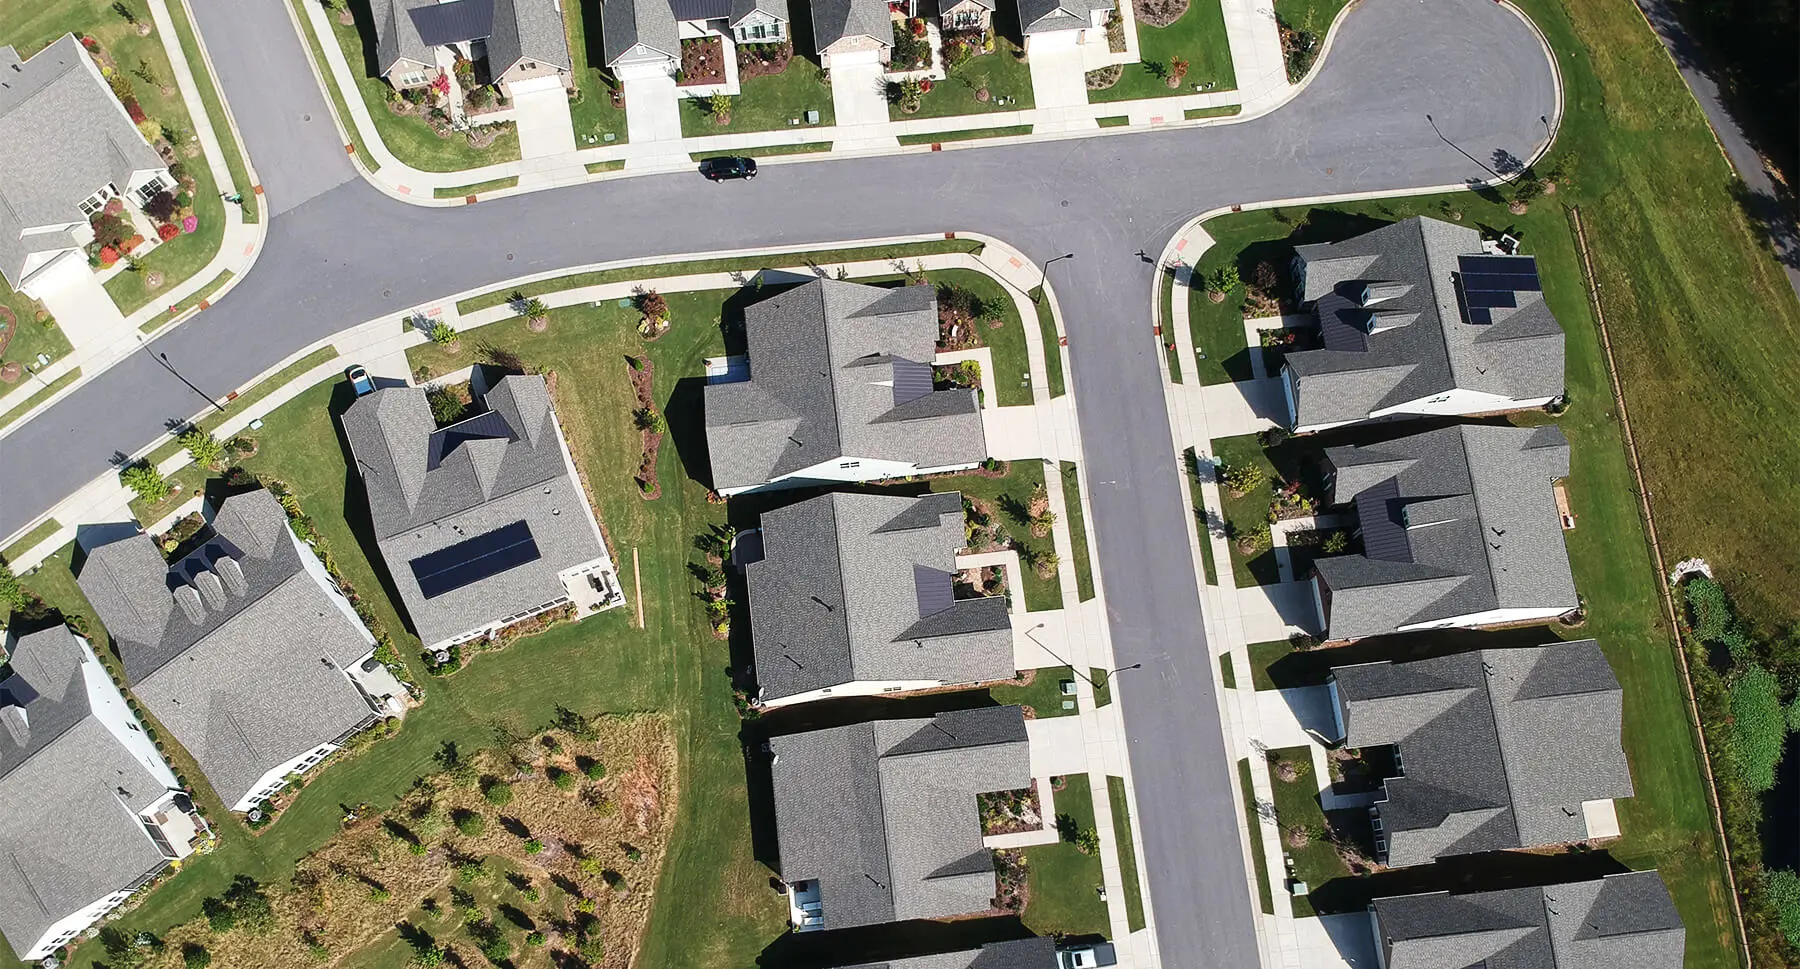 Aerial view of a neighborhood street with two homes that have solar systems